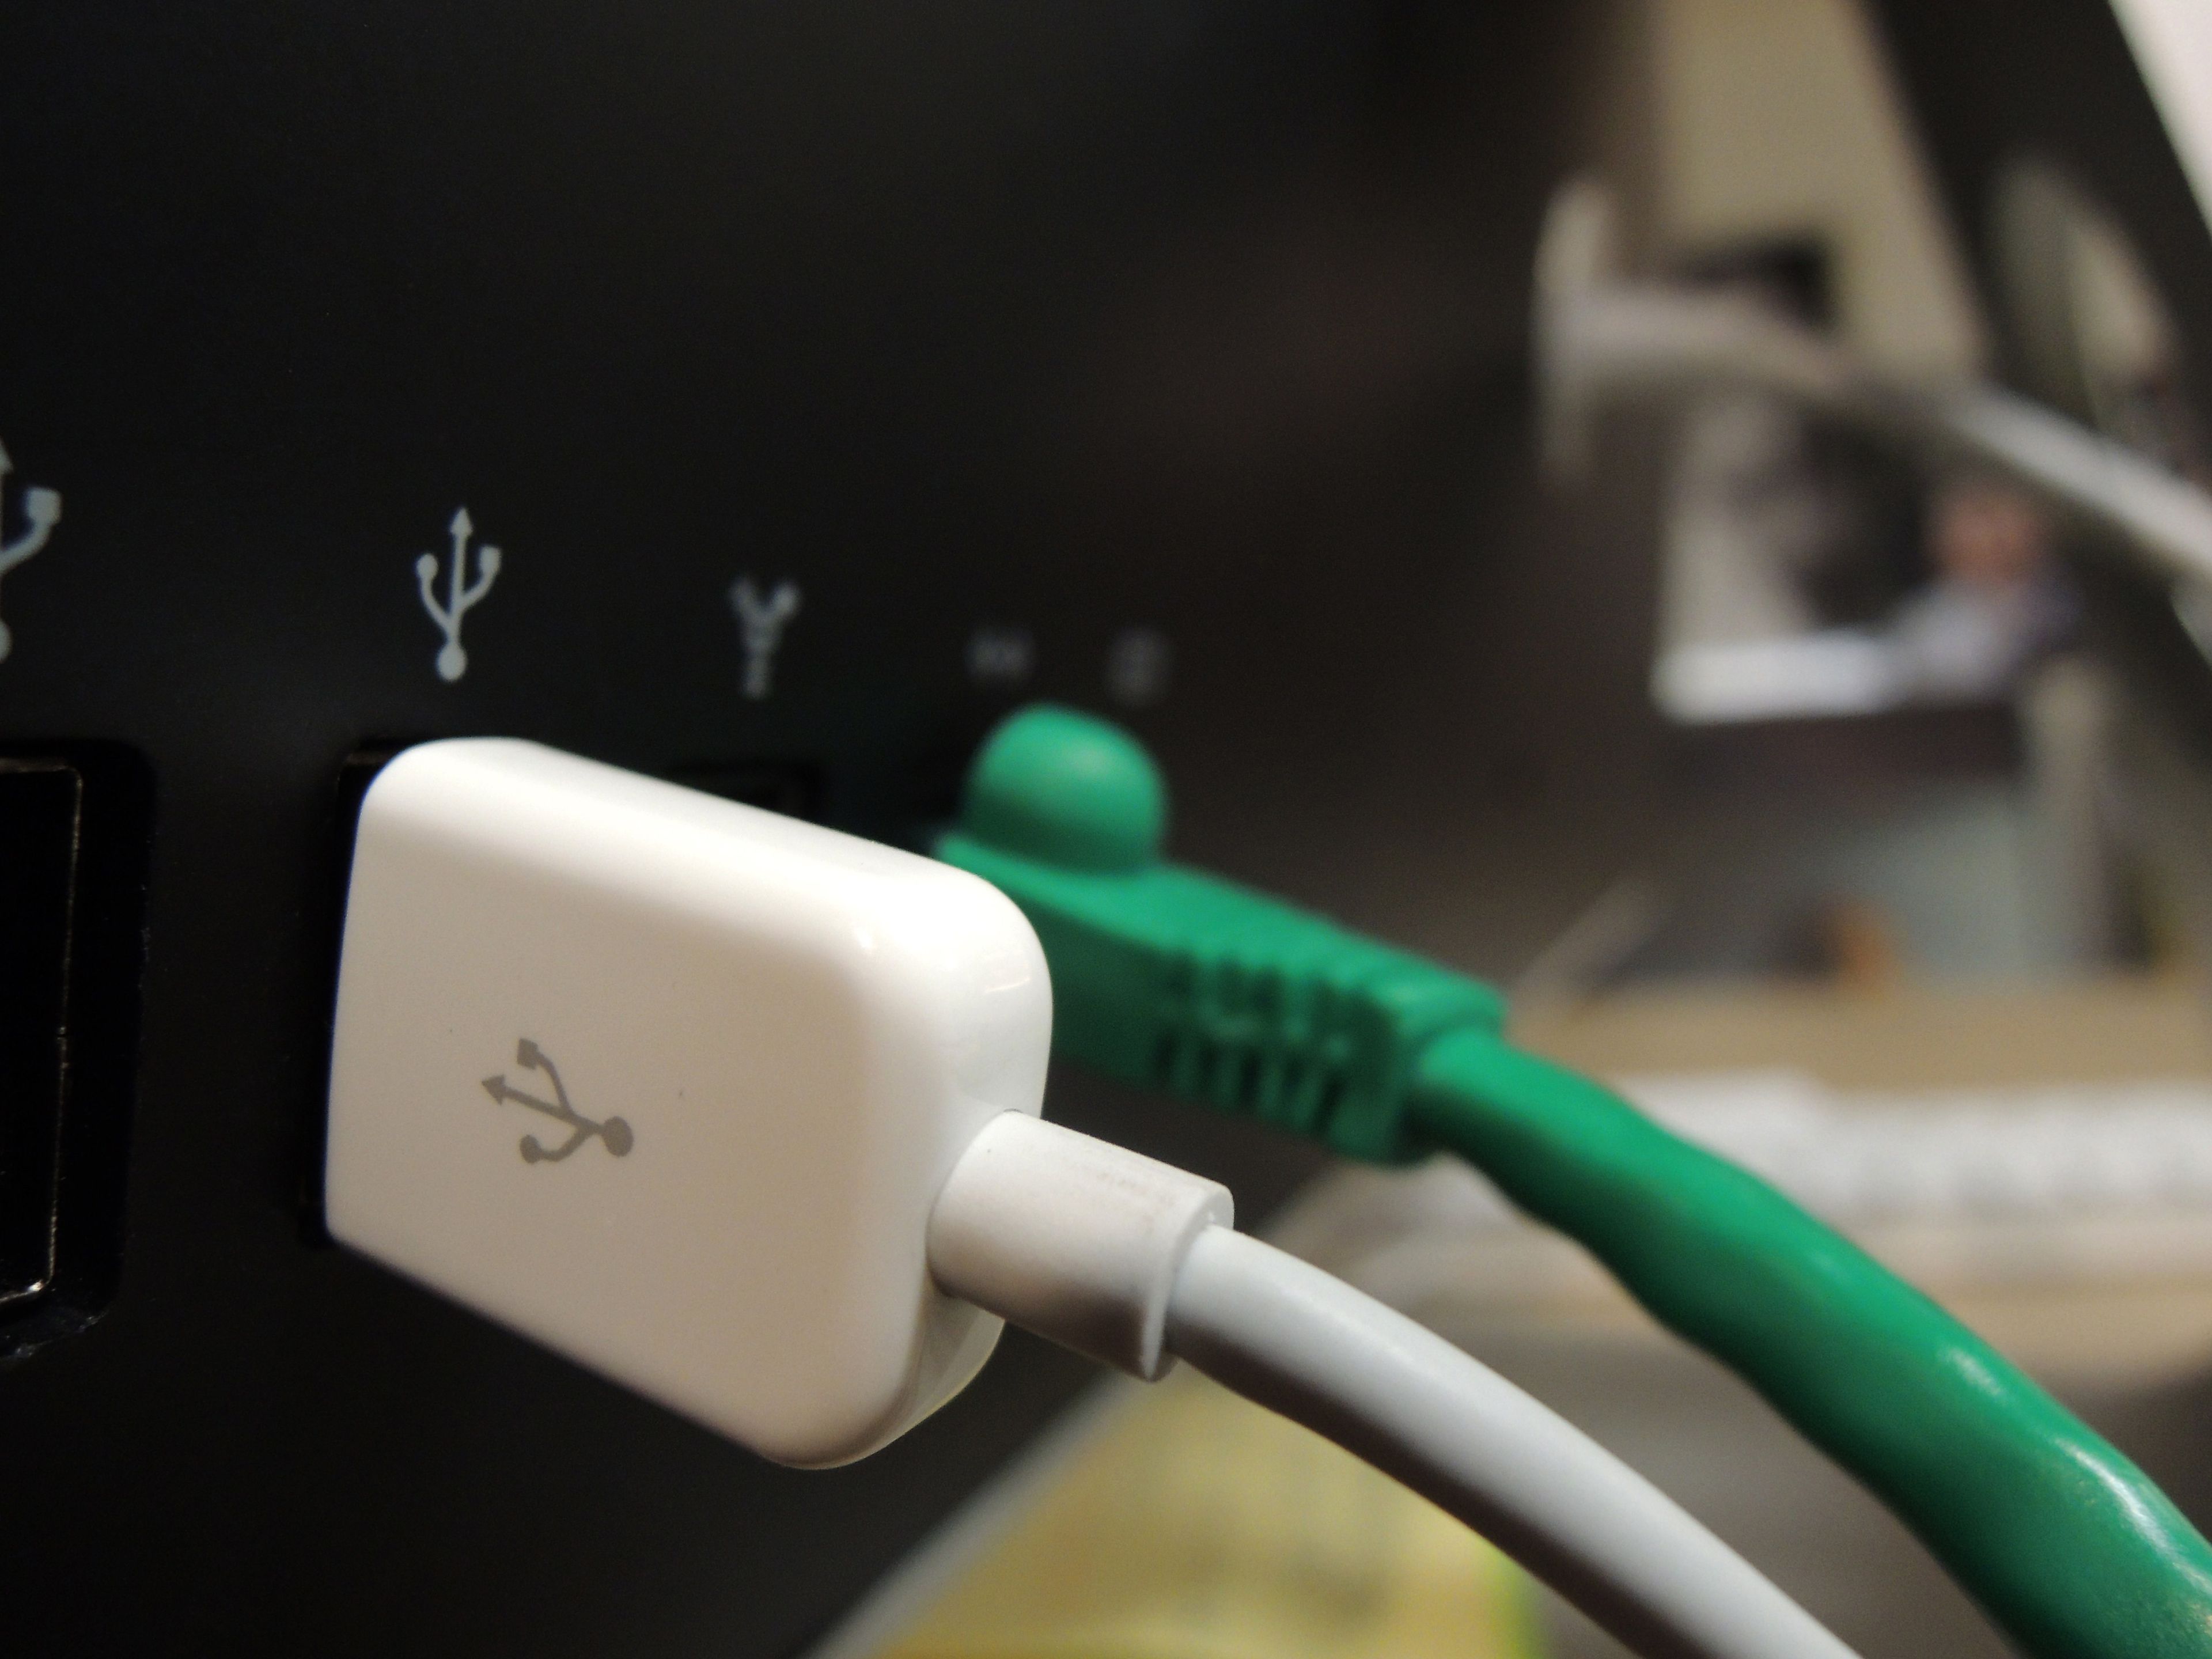 An image of a cord plugged into a USB port.